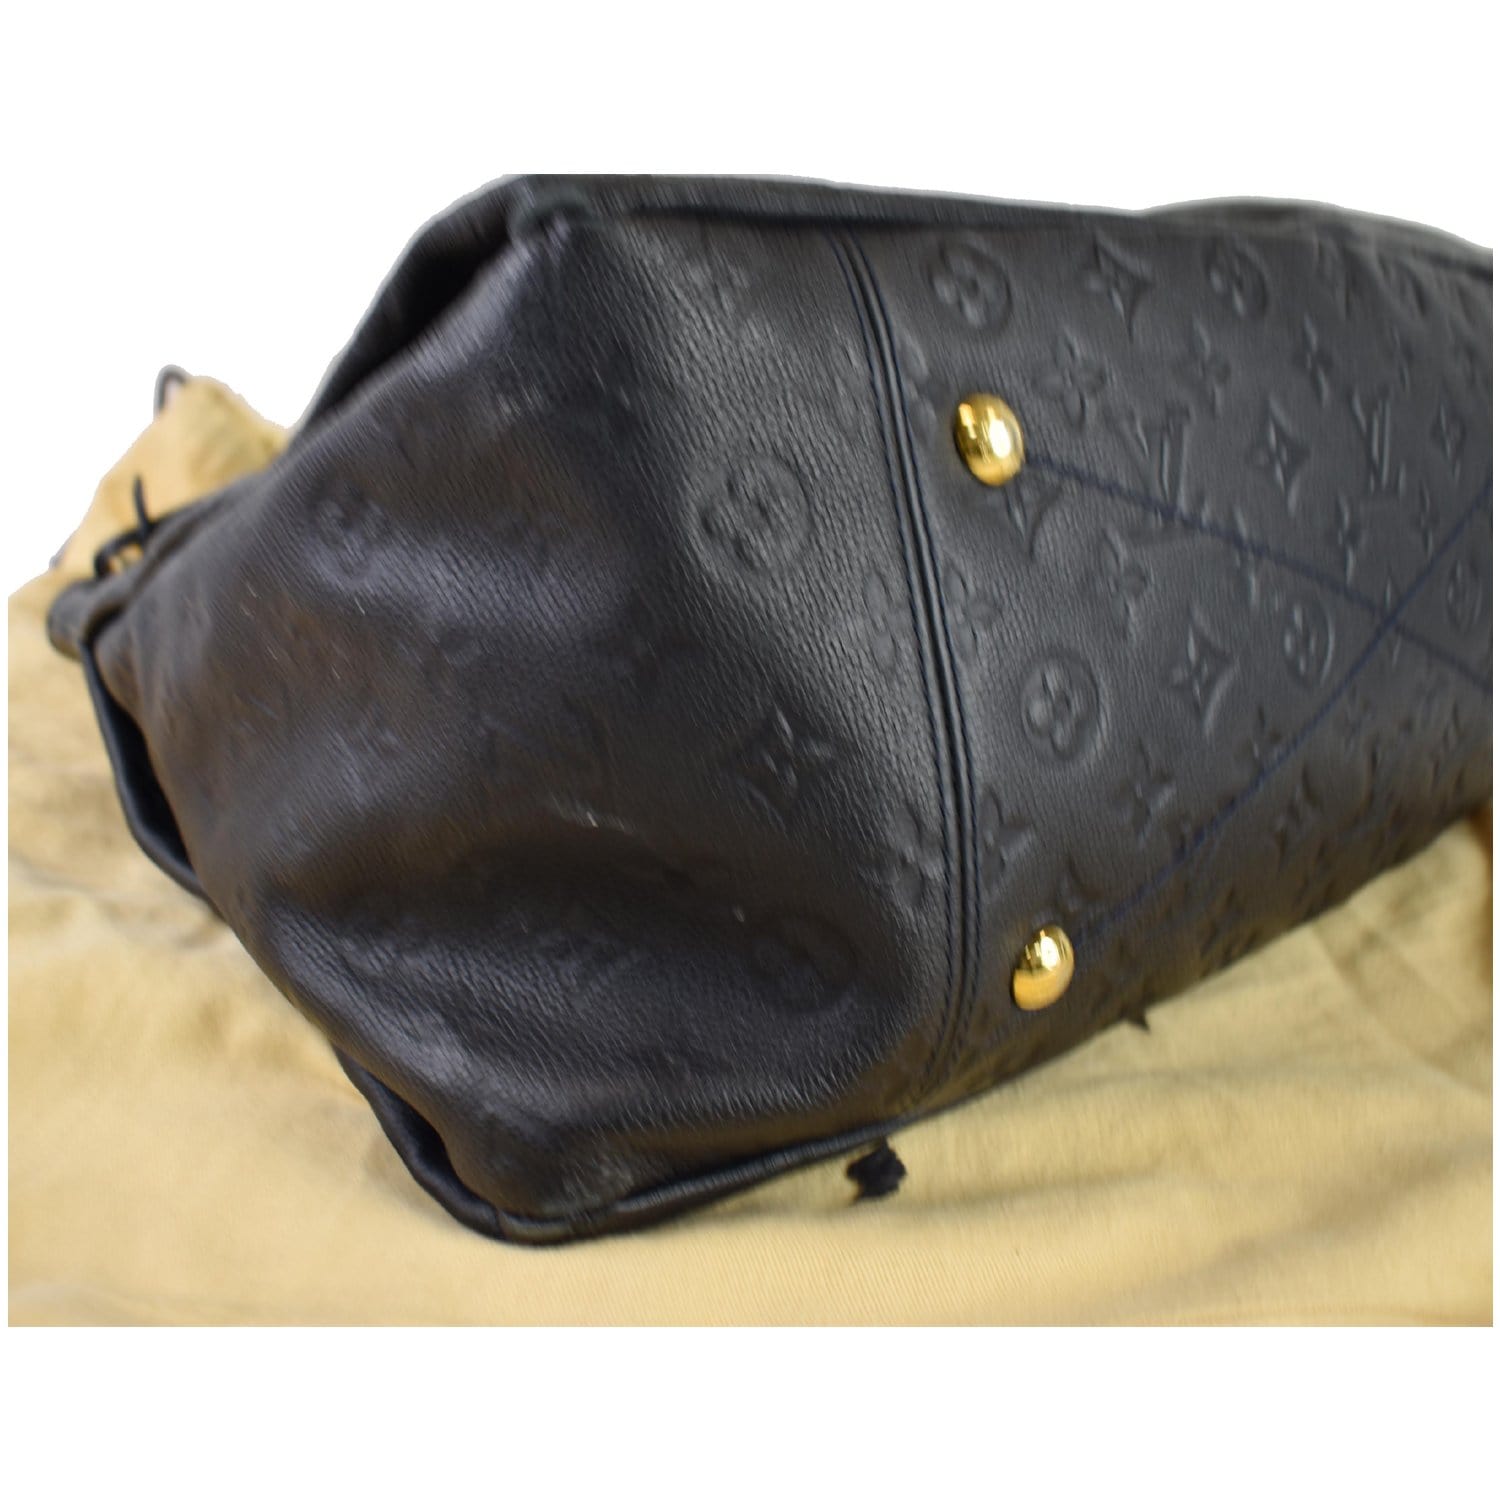 What Goes Around Comes Around Louis Vuitton Navy Empreinte Artsy MM Hobo -  ShopStyle Shoulder Bags